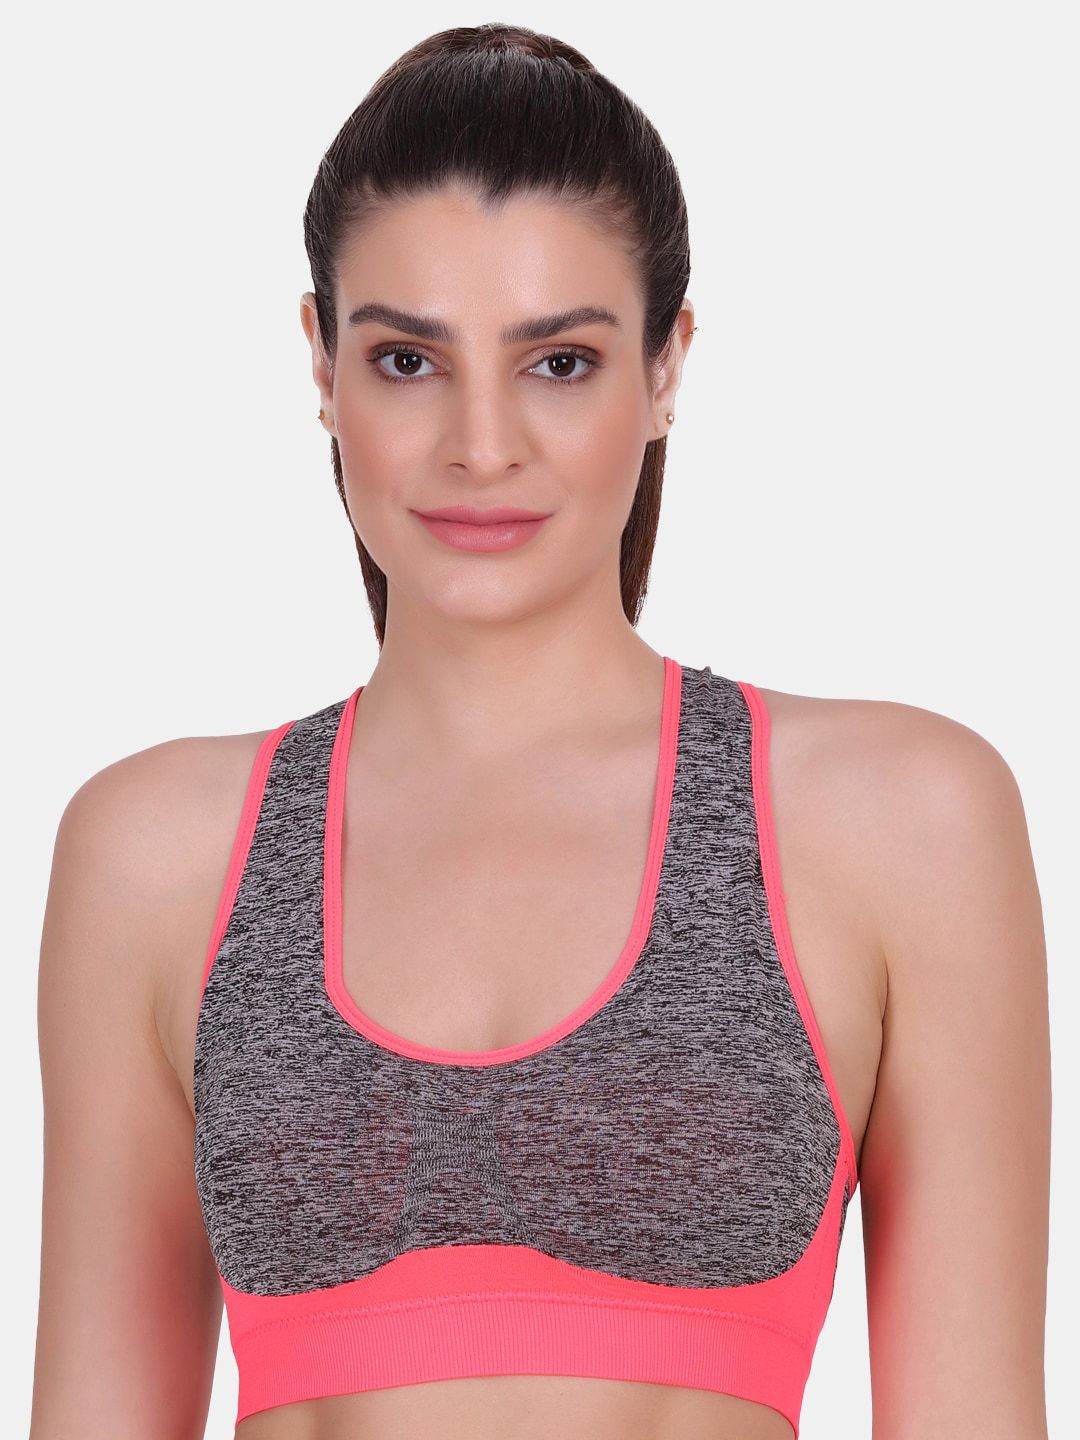 Amour Secret Pink & Grey Colourblocked Lightly padded Sports Bra SB1576 Price in India